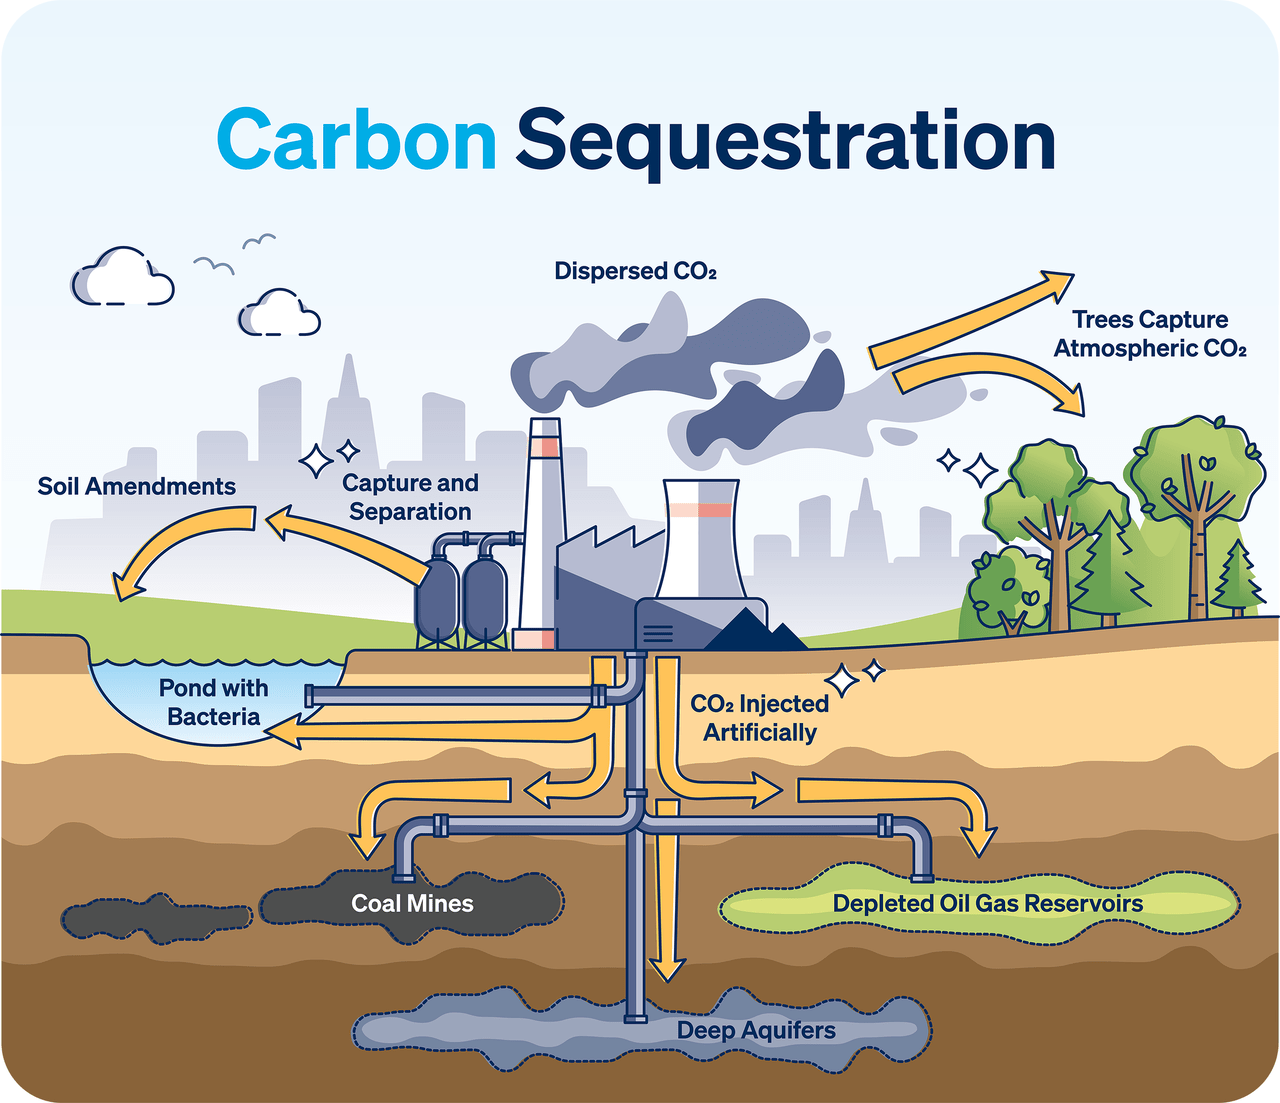 Carbon Sequestration 101: Understanding the Risks and Finding Insurance Solutions